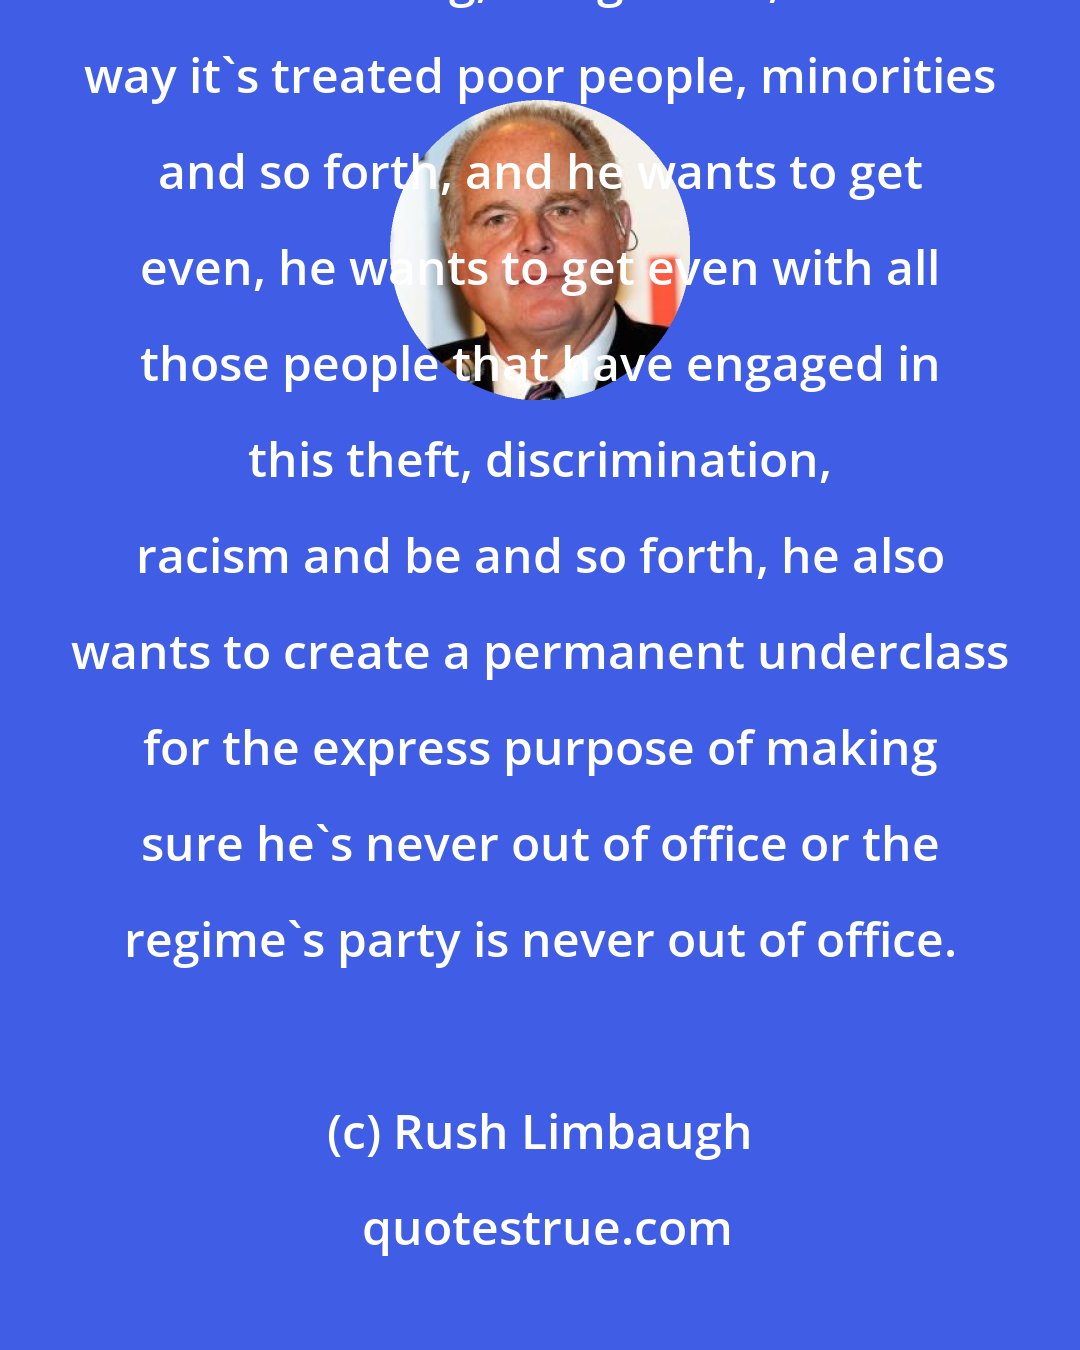 Rush Limbaugh: Barack Obama thinks this country is a crime. Obama thinks this country is a walking, living crime, the way it's treated poor people, minorities and so forth, and he wants to get even, he wants to get even with all those people that have engaged in this theft, discrimination, racism and be and so forth, he also wants to create a permanent underclass for the express purpose of making sure he's never out of office or the regime's party is never out of office.